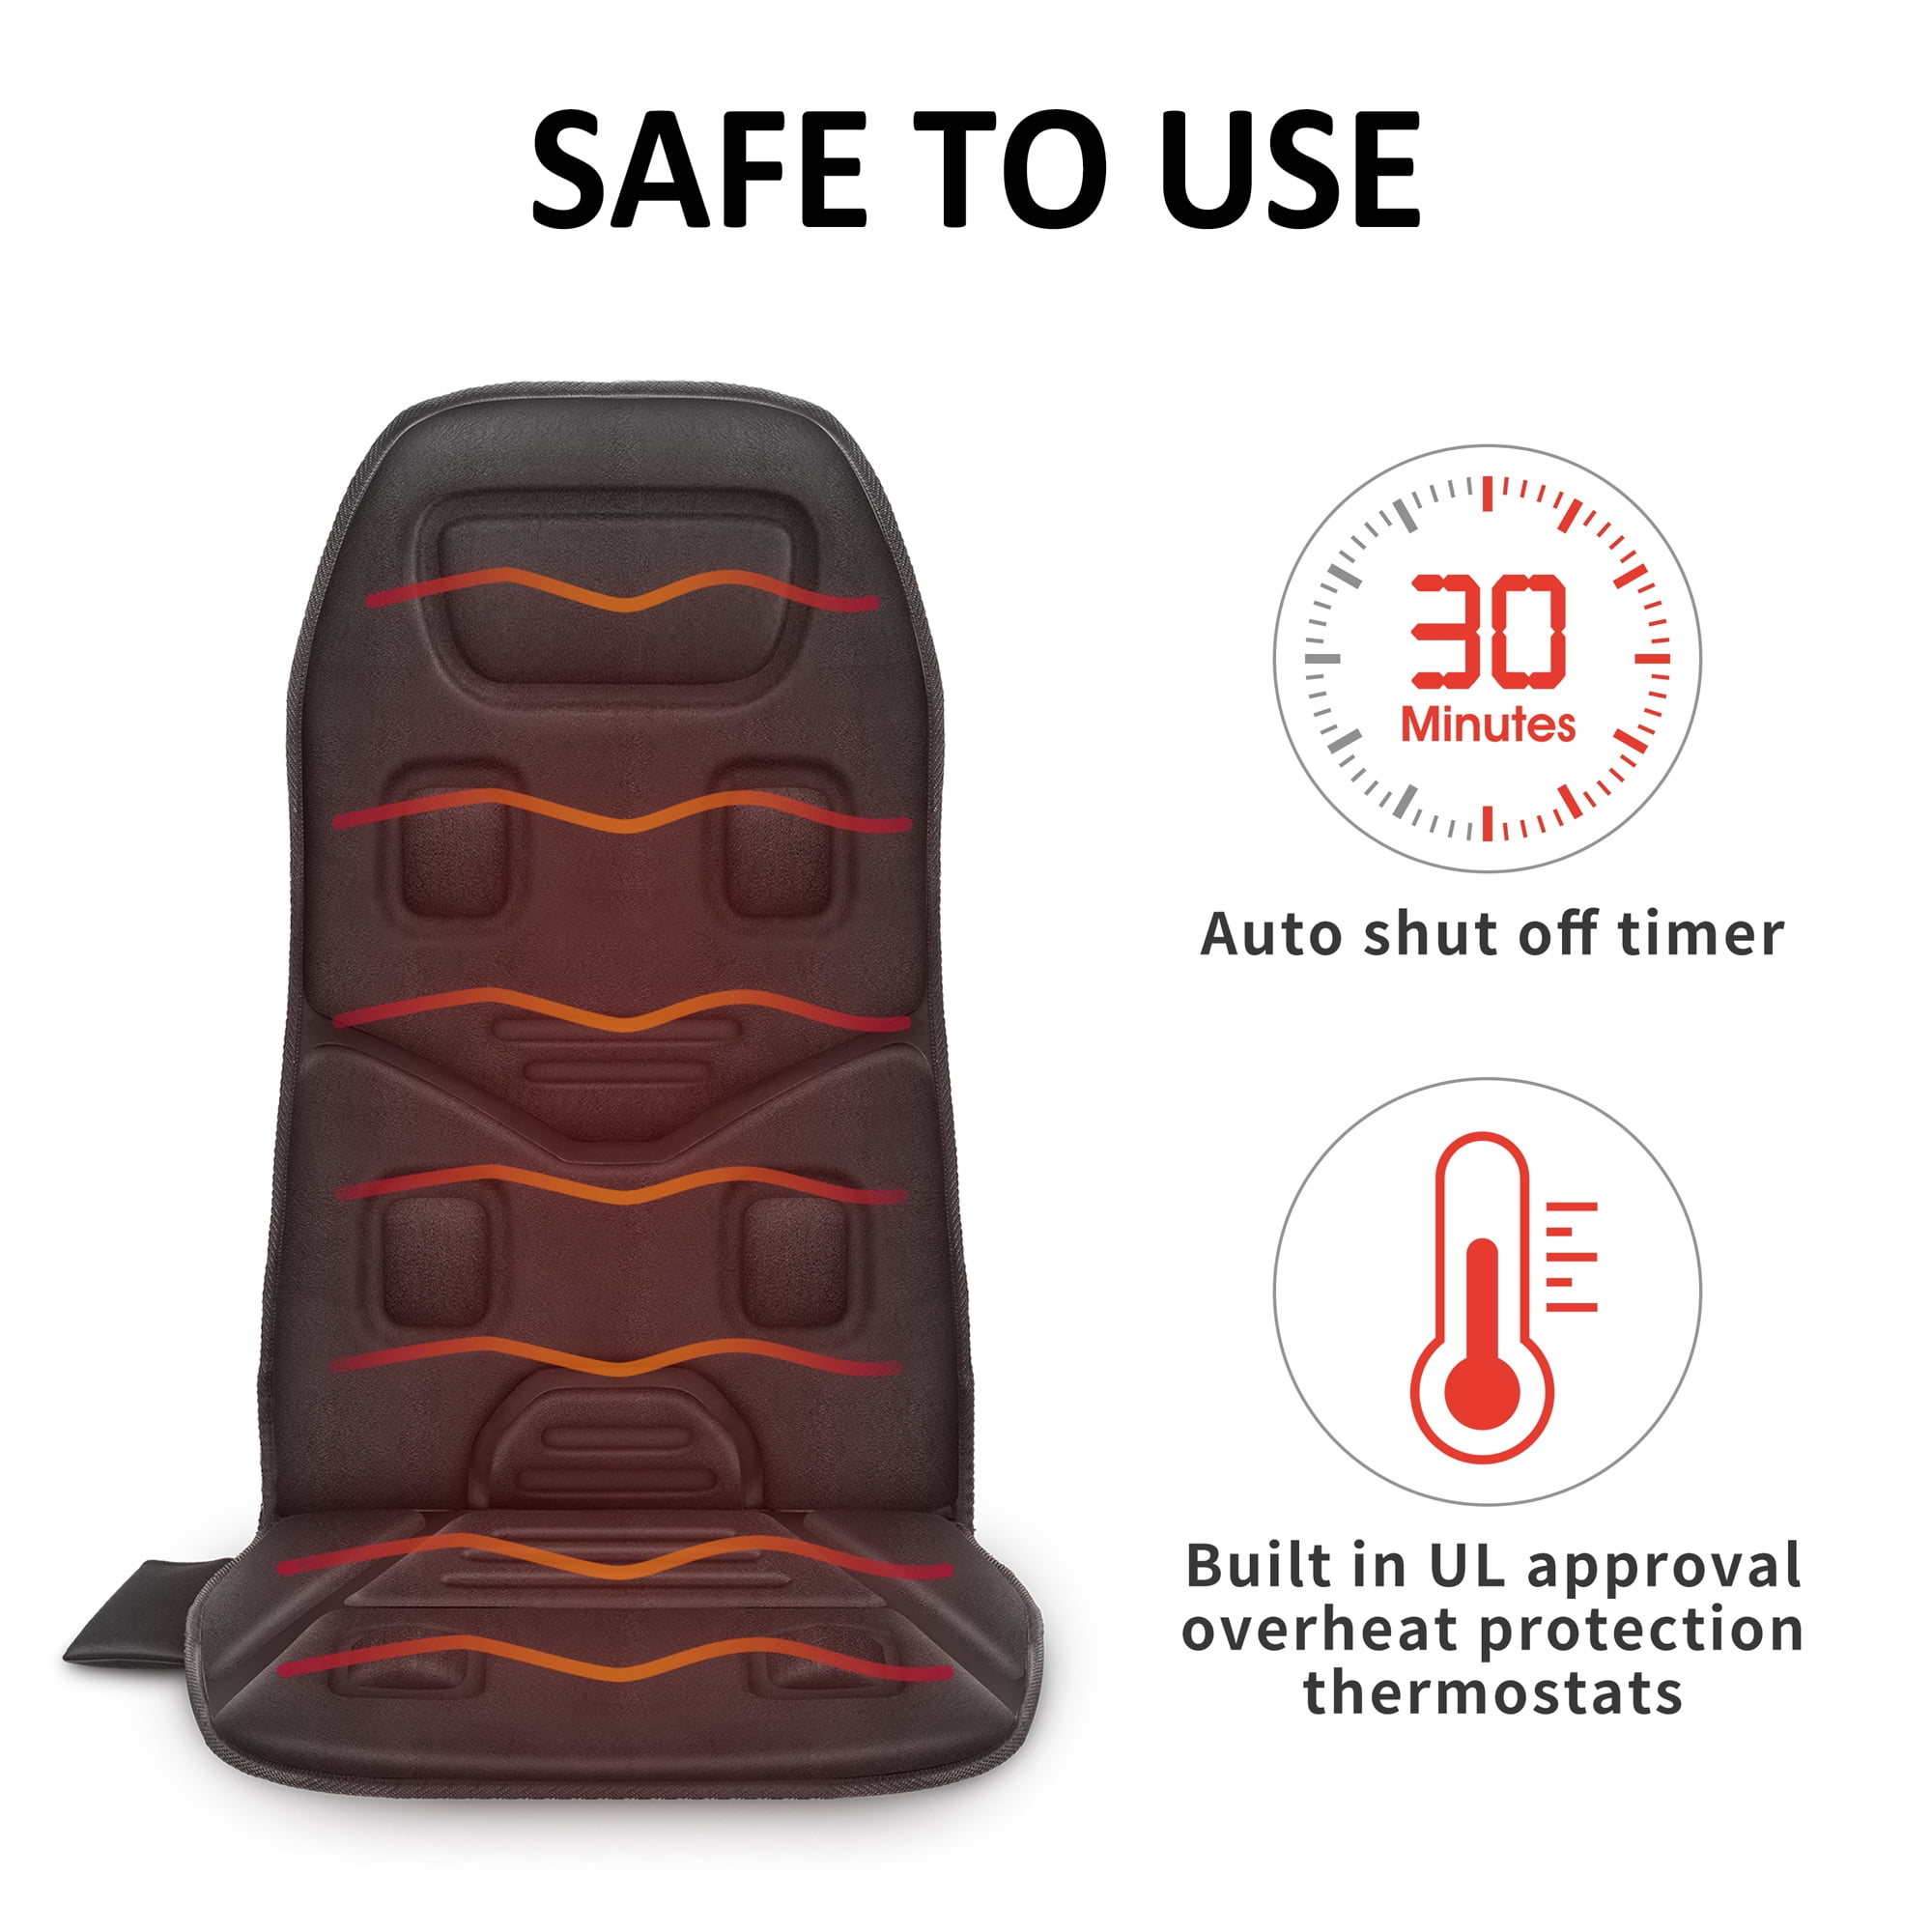 Comfier Deluxe Heated Car Seat Cushion Deluxe - CILI-2613